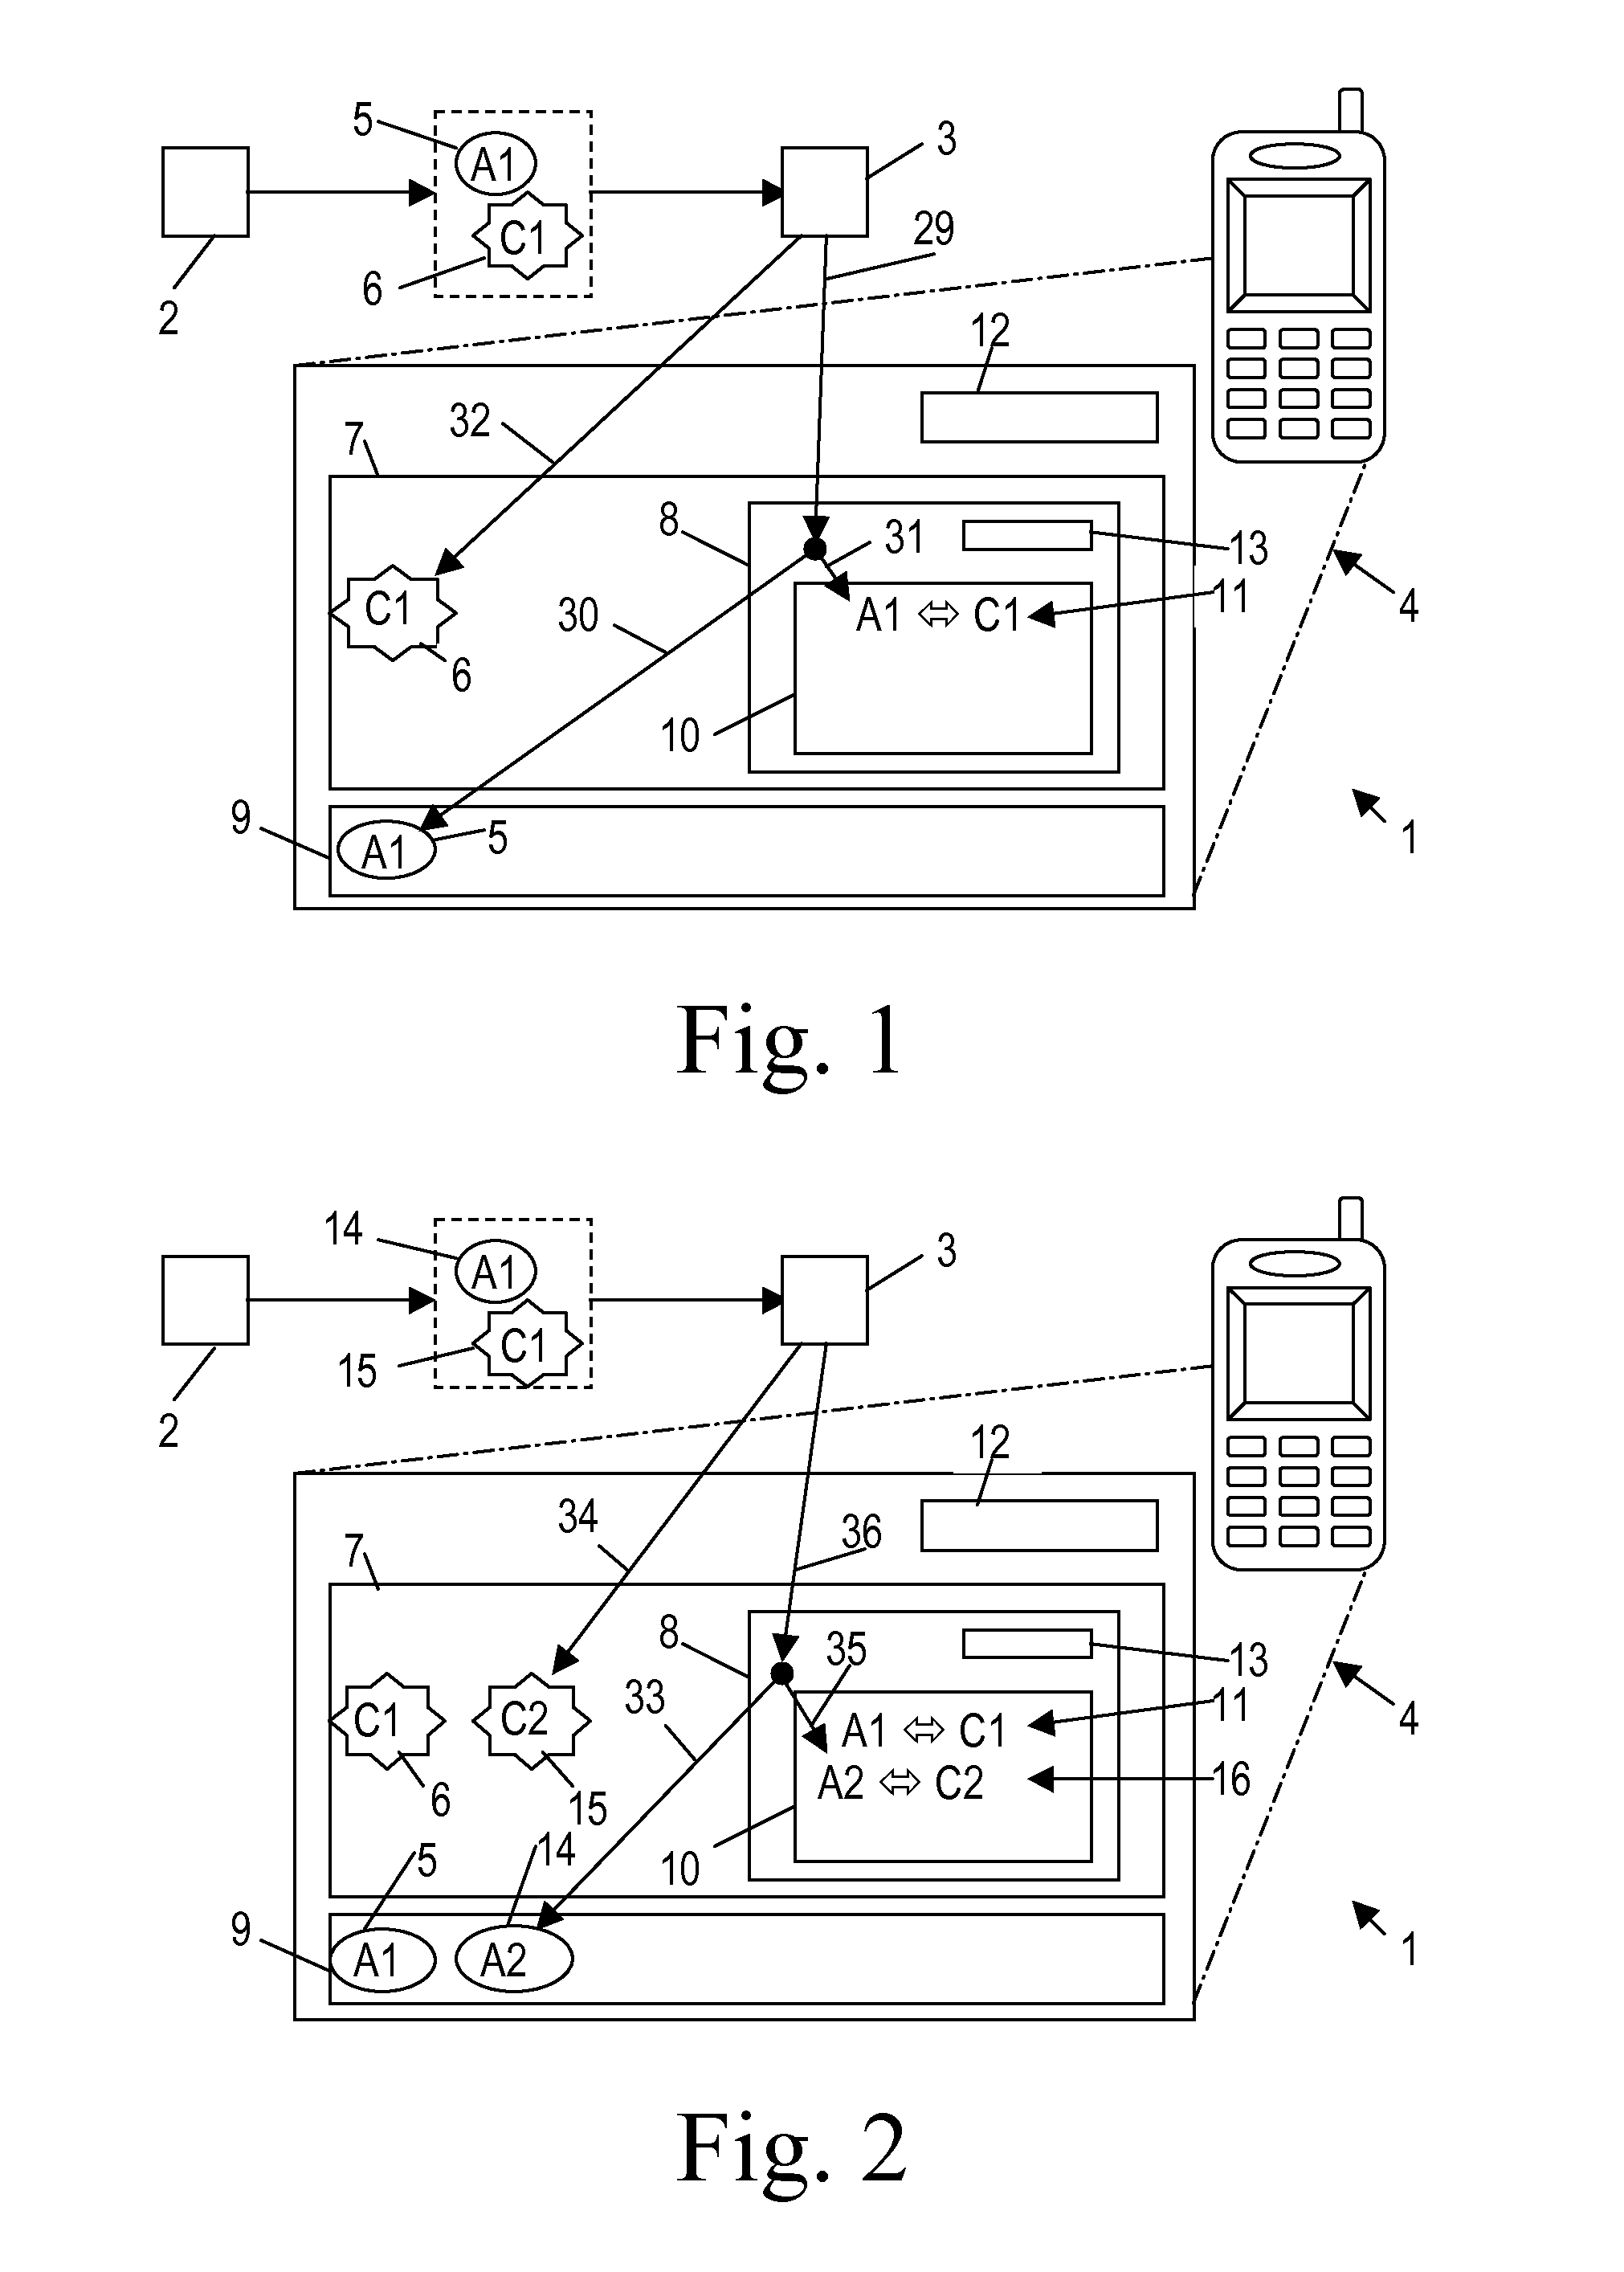 Method of accessing applications in a secure mobile environment